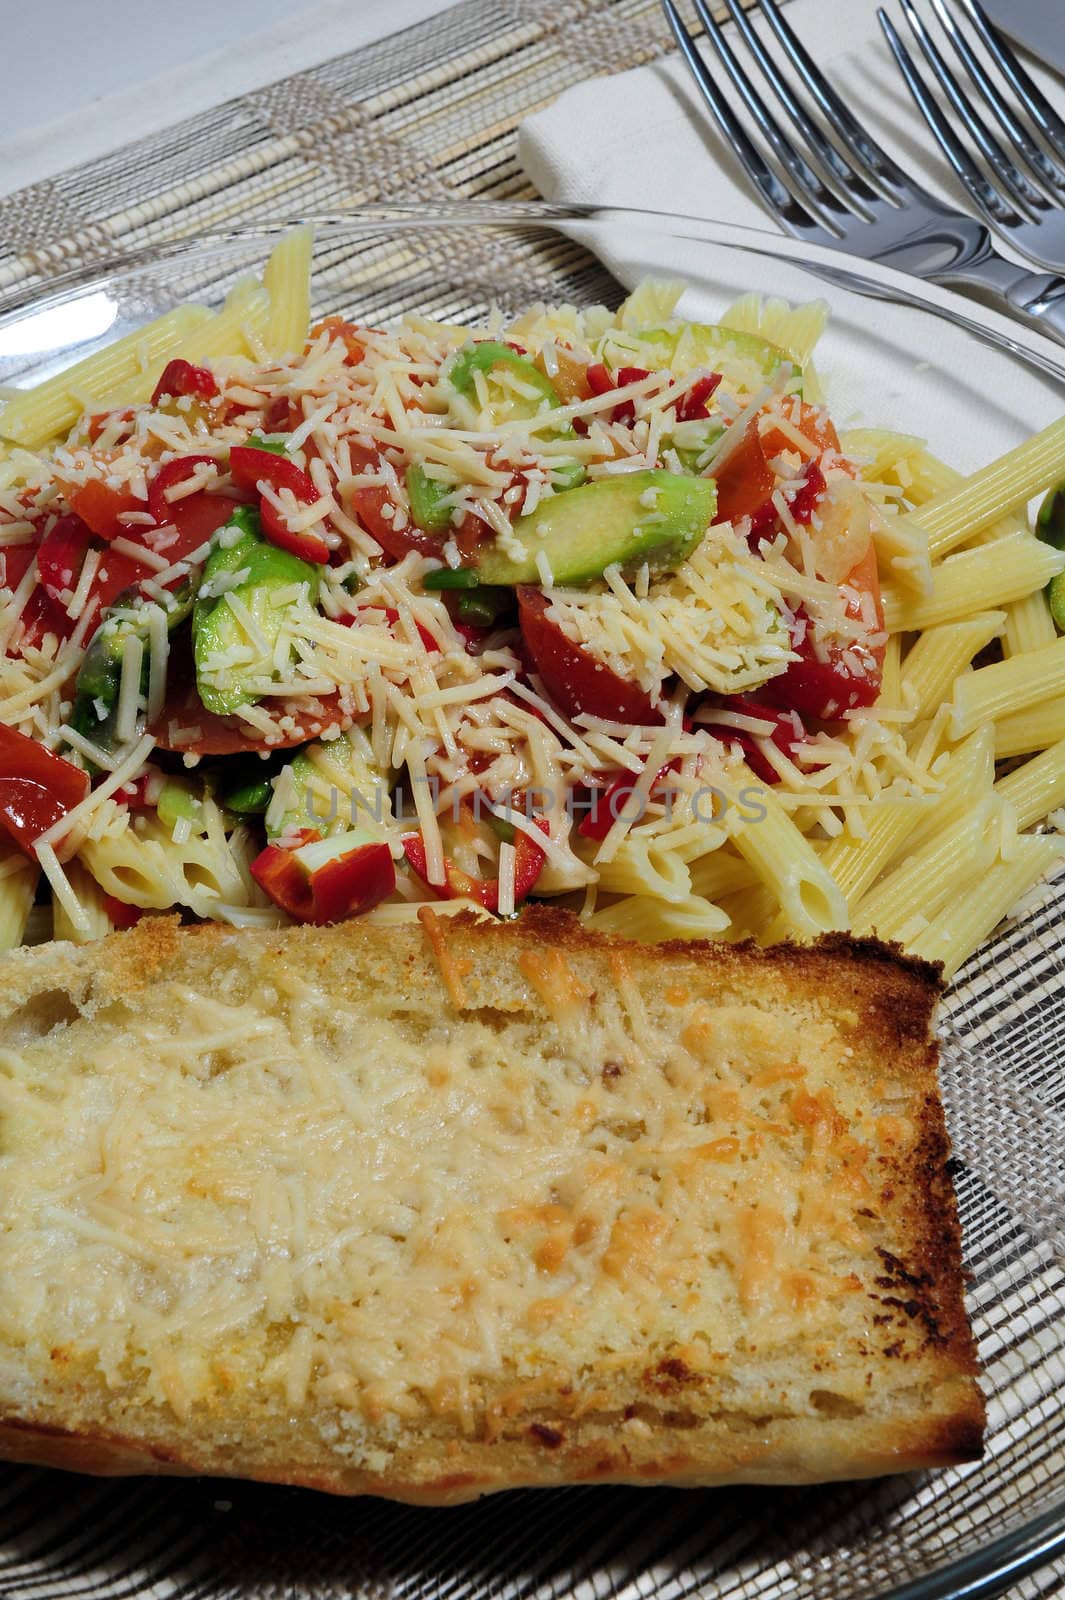 Penne Pasta And Asiago Cheese by bendicks